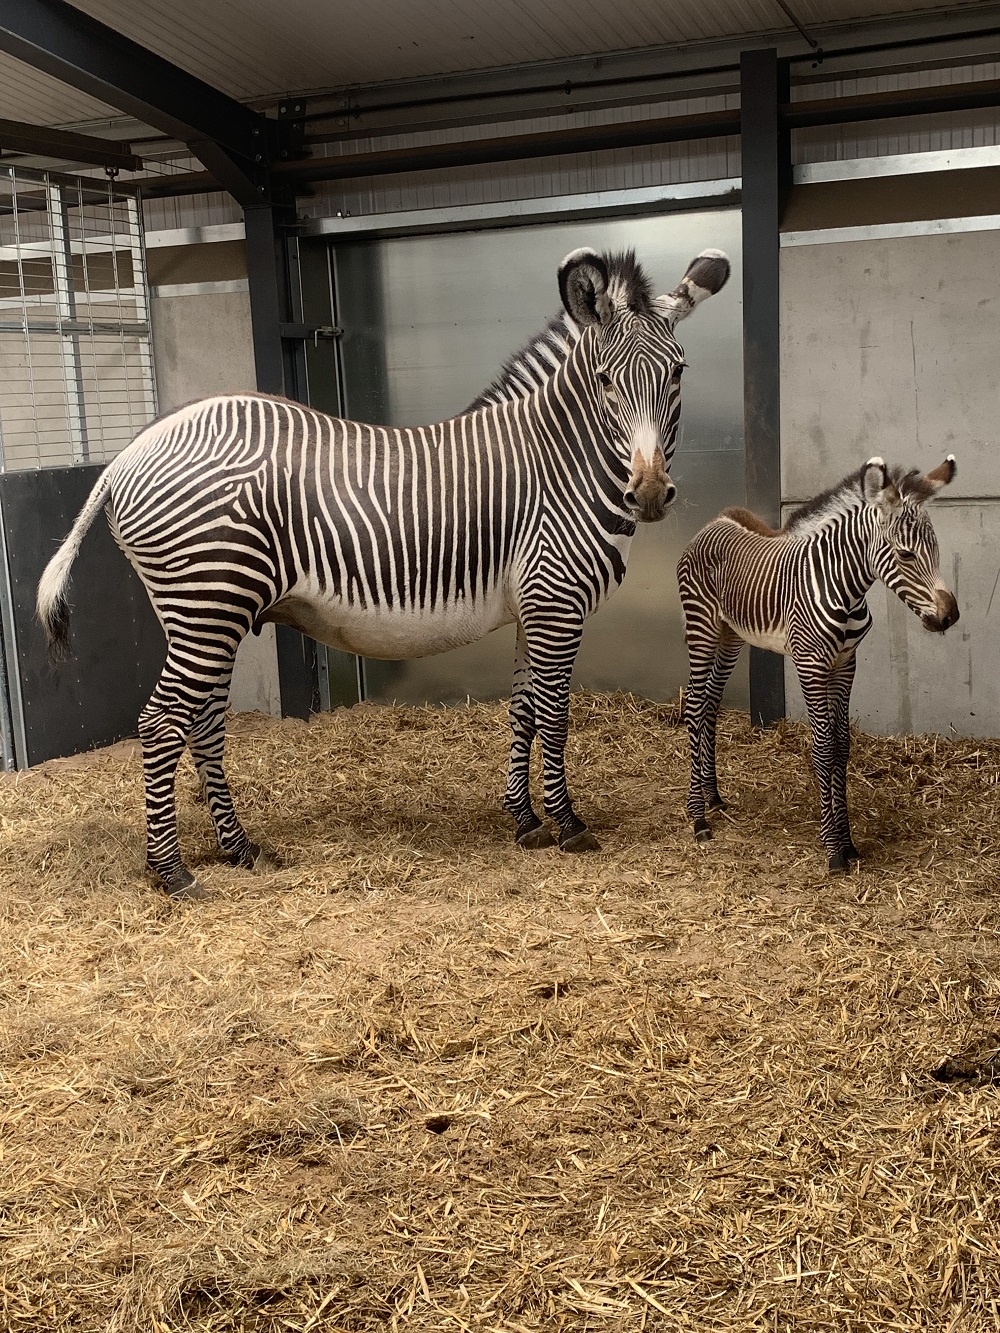 No health problems have been reported after the birth (Ian Nock/West Midlands Safari Park/PA)